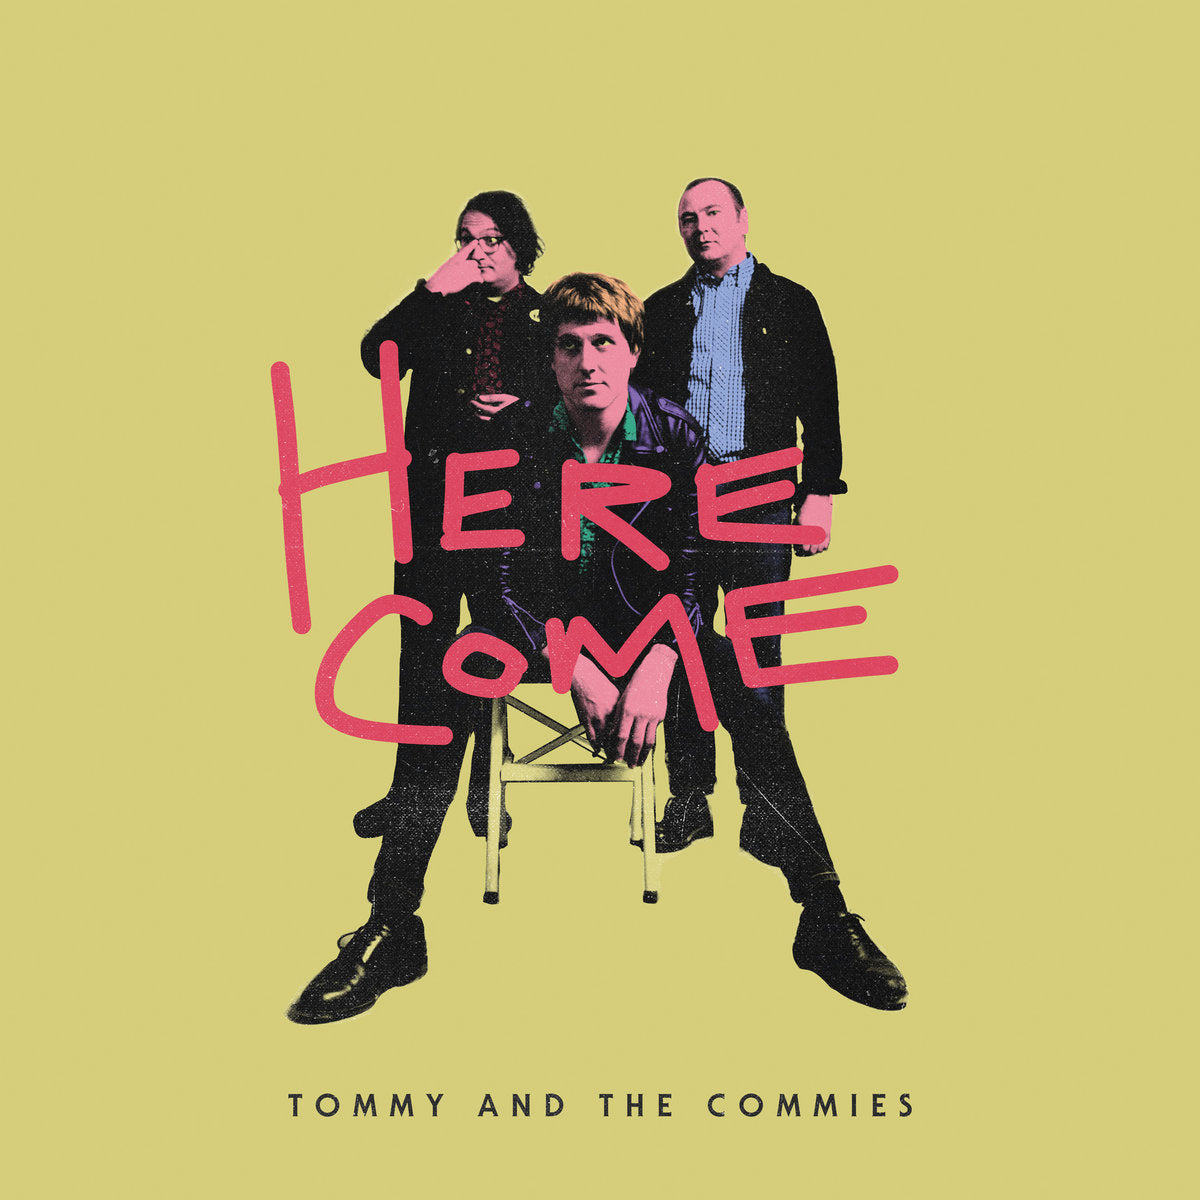 Tommy and the Commies - Here Come (Vinyl LP)